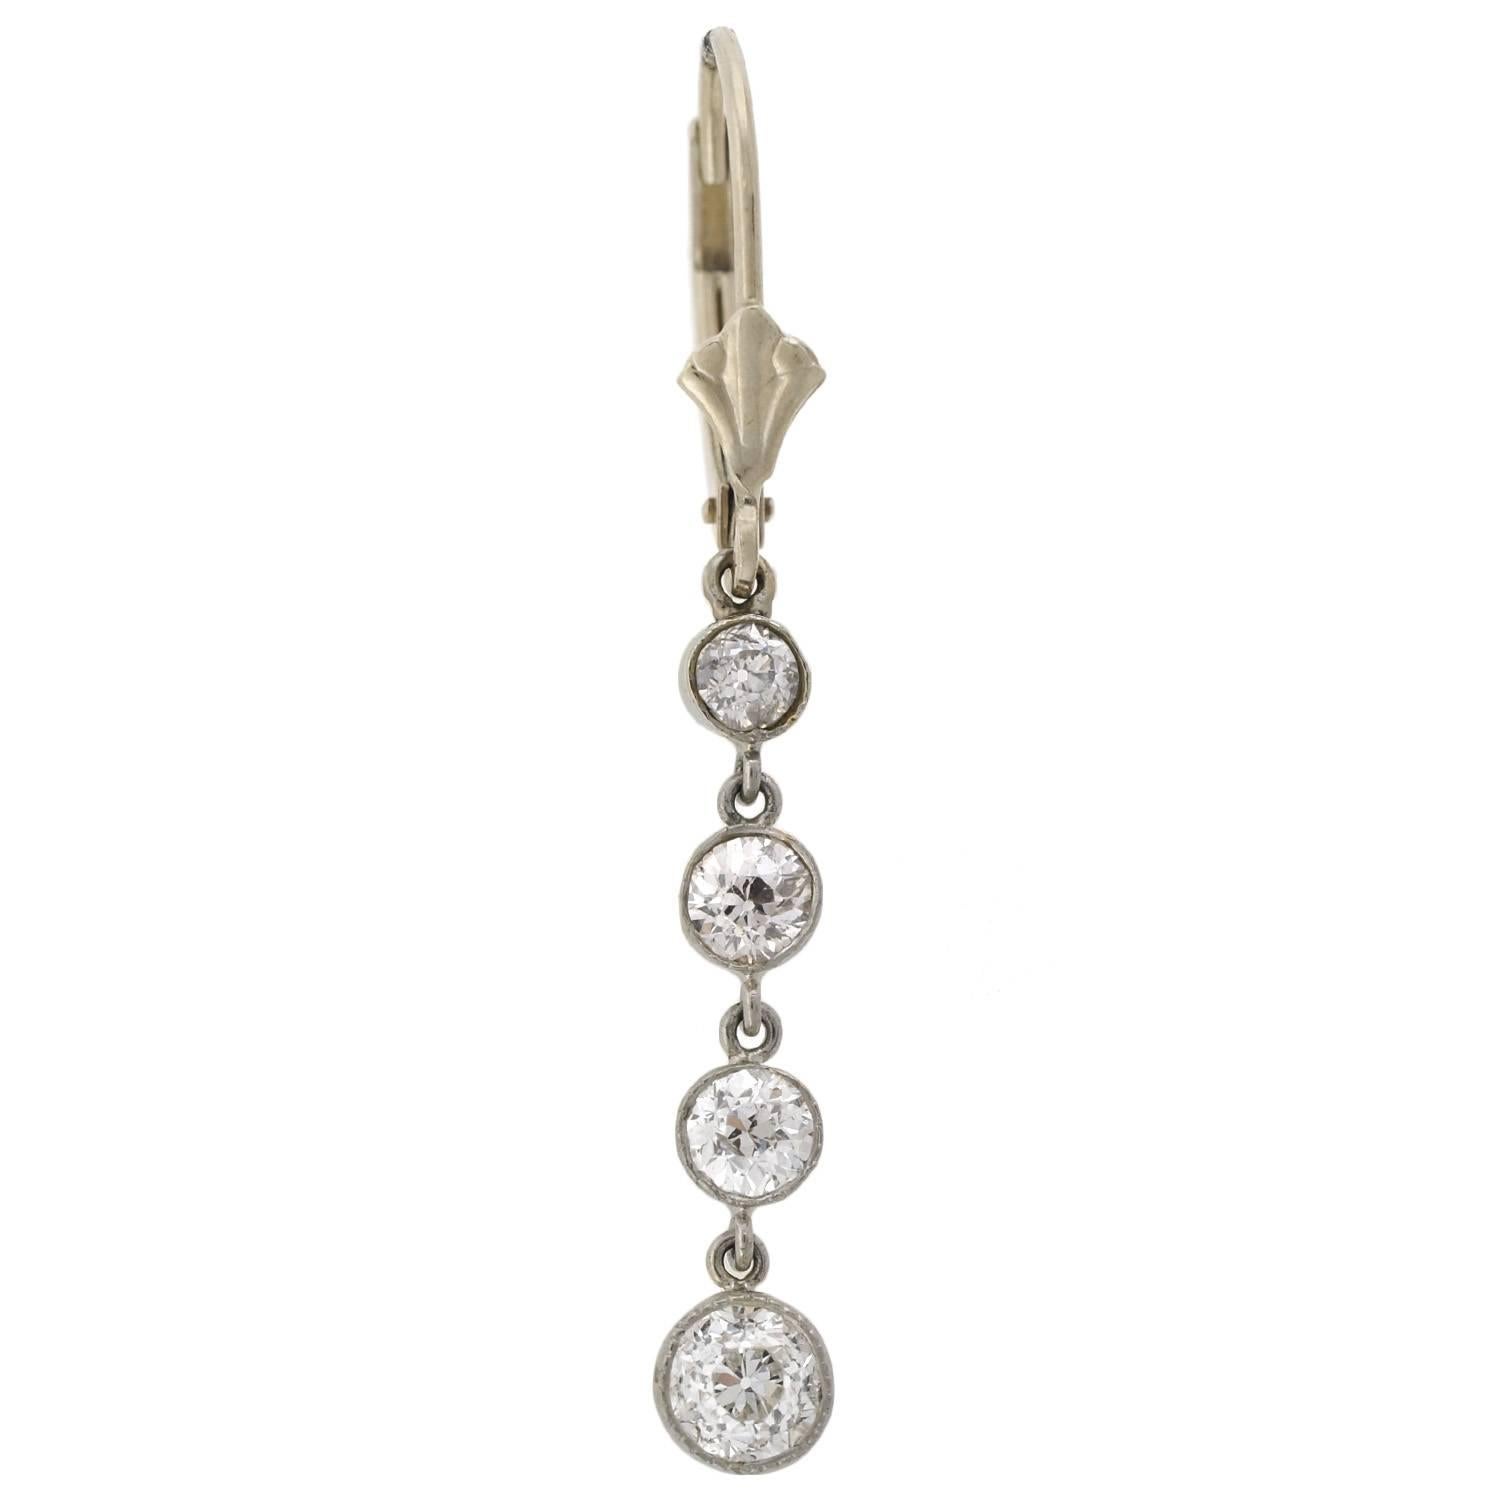 A dazzling pair of diamond earrings from the Edwardian (ca1910) era! These elegant earrings are made of platinum and hang from modern 14kt white gold lever back wires. Each earrings displays a simple, yet beautiful design. Four sparkling old